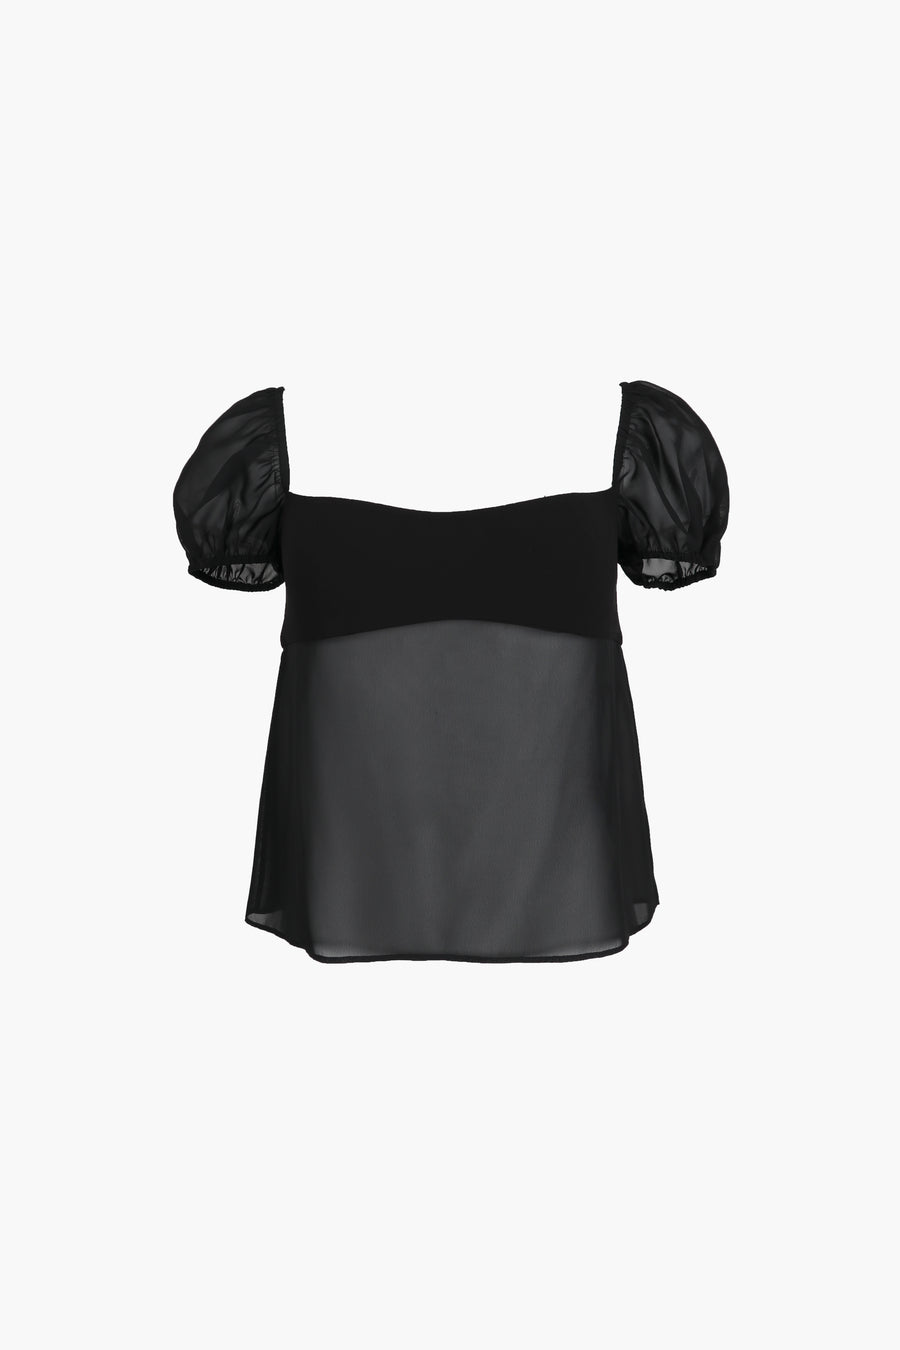 Short sleeved top in black with semi sheer bodice 